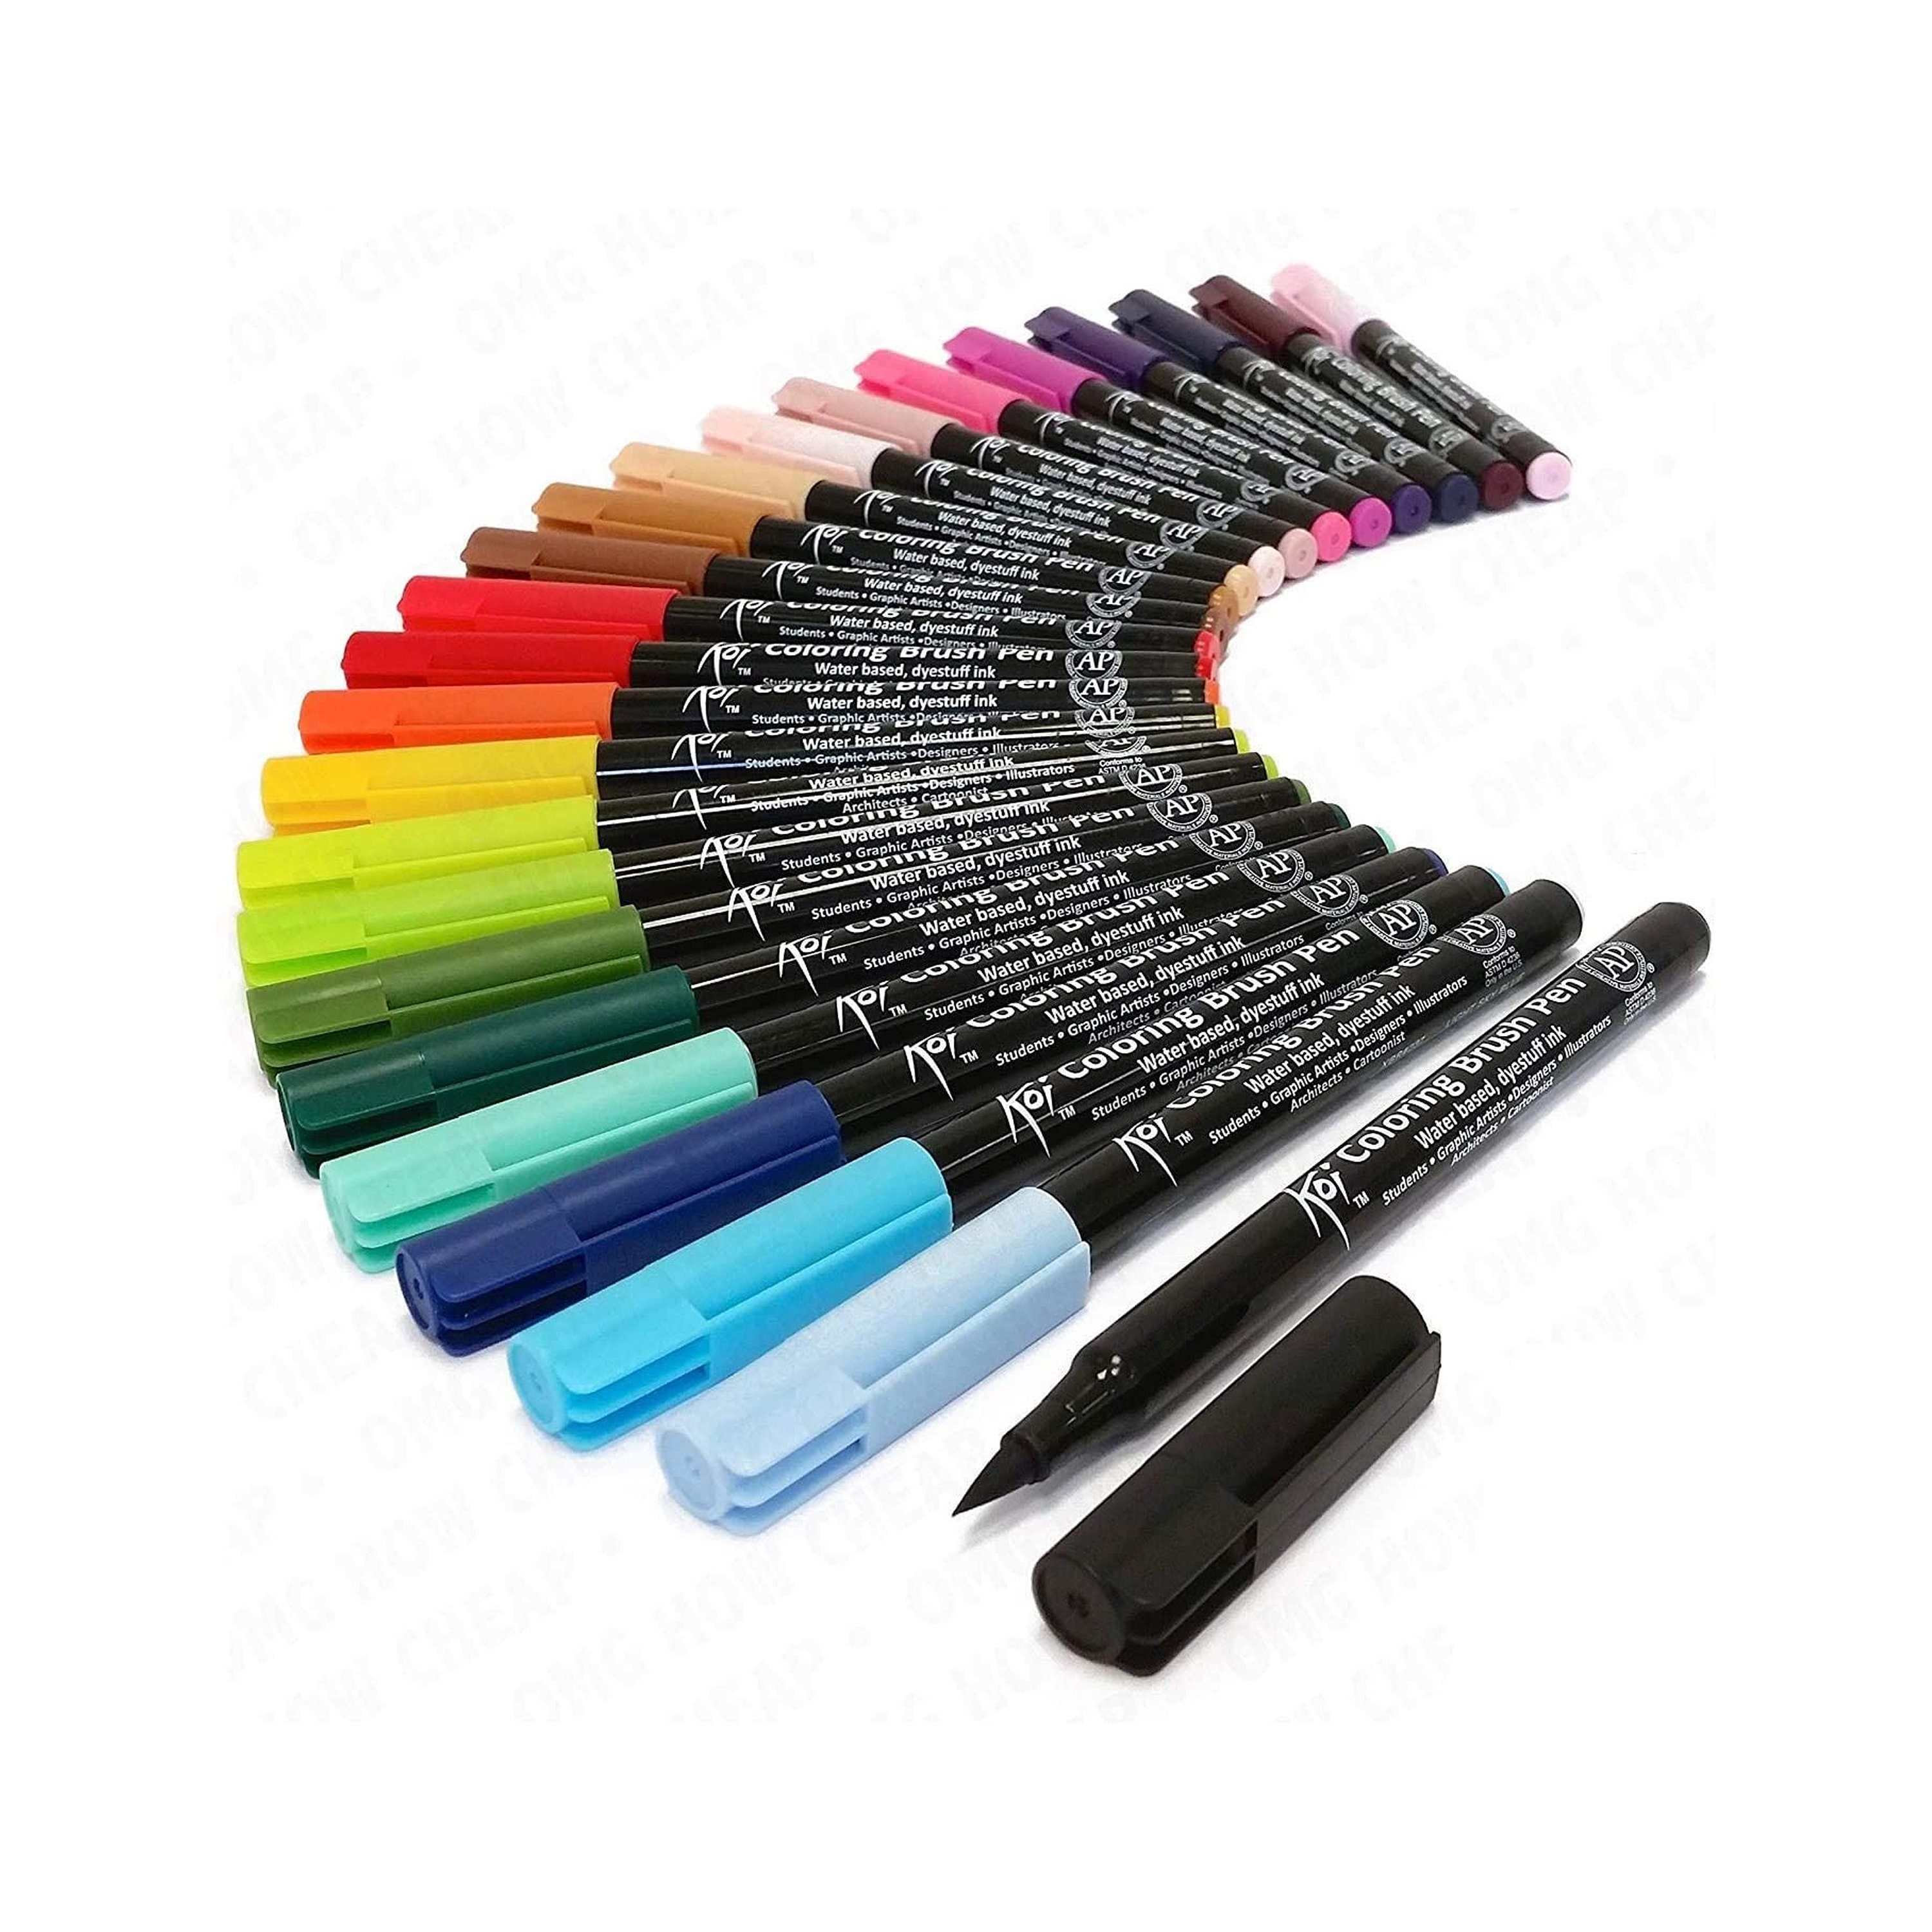 High-Quality Calligraphy Pens & Markers for Artists, JAM Paper